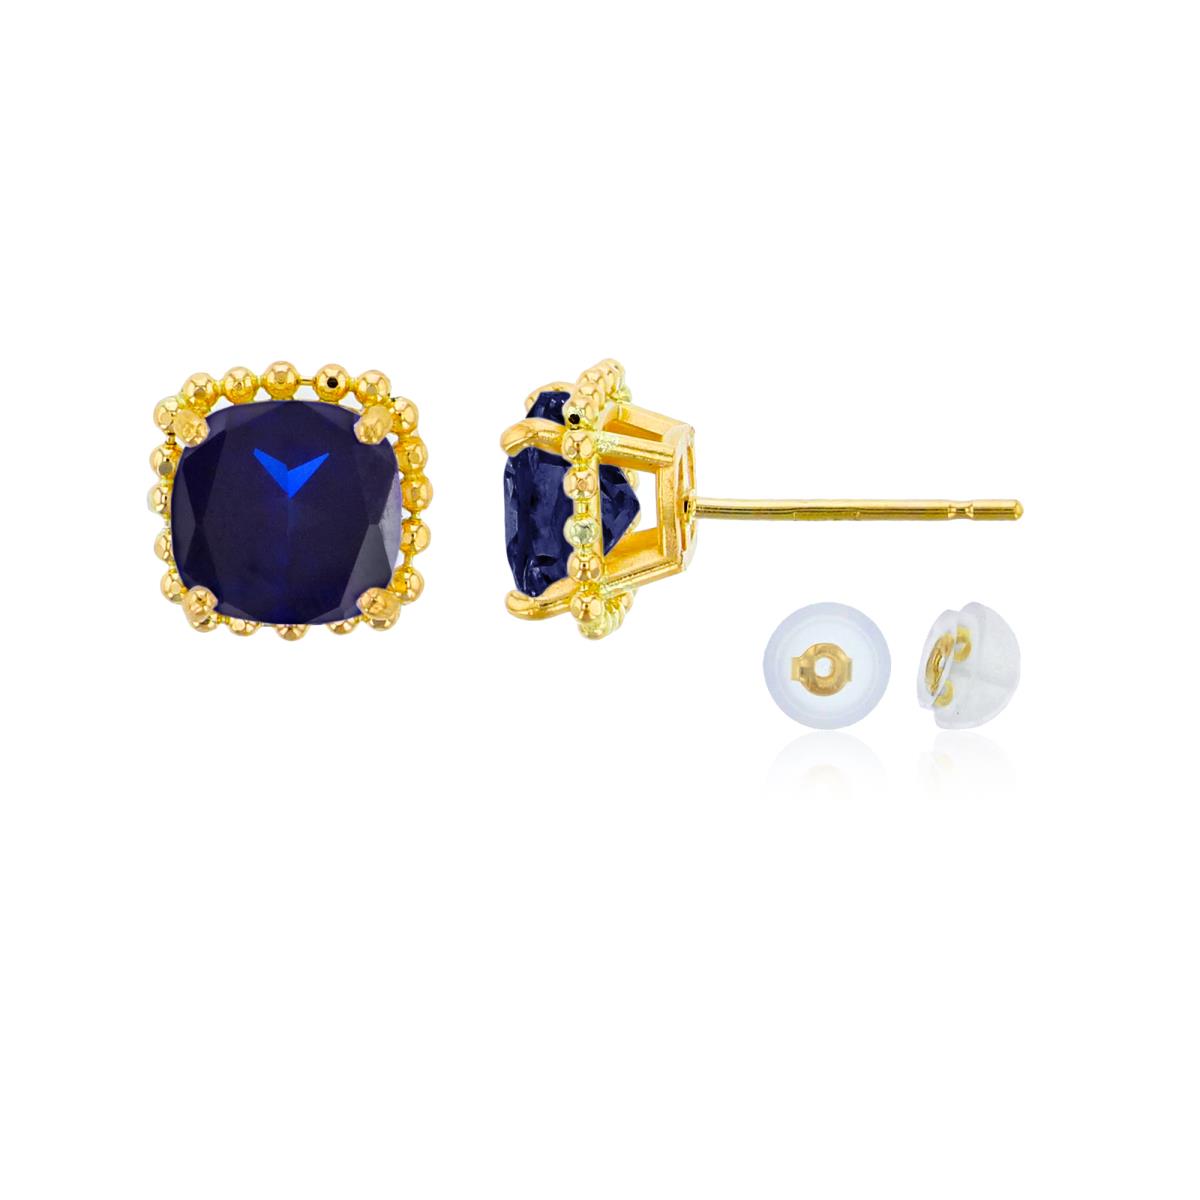 10K Yellow Gold 6x6mm Cushion Cut Created Blue Sapphire Bead Frame Stud Earring with Silicone Back